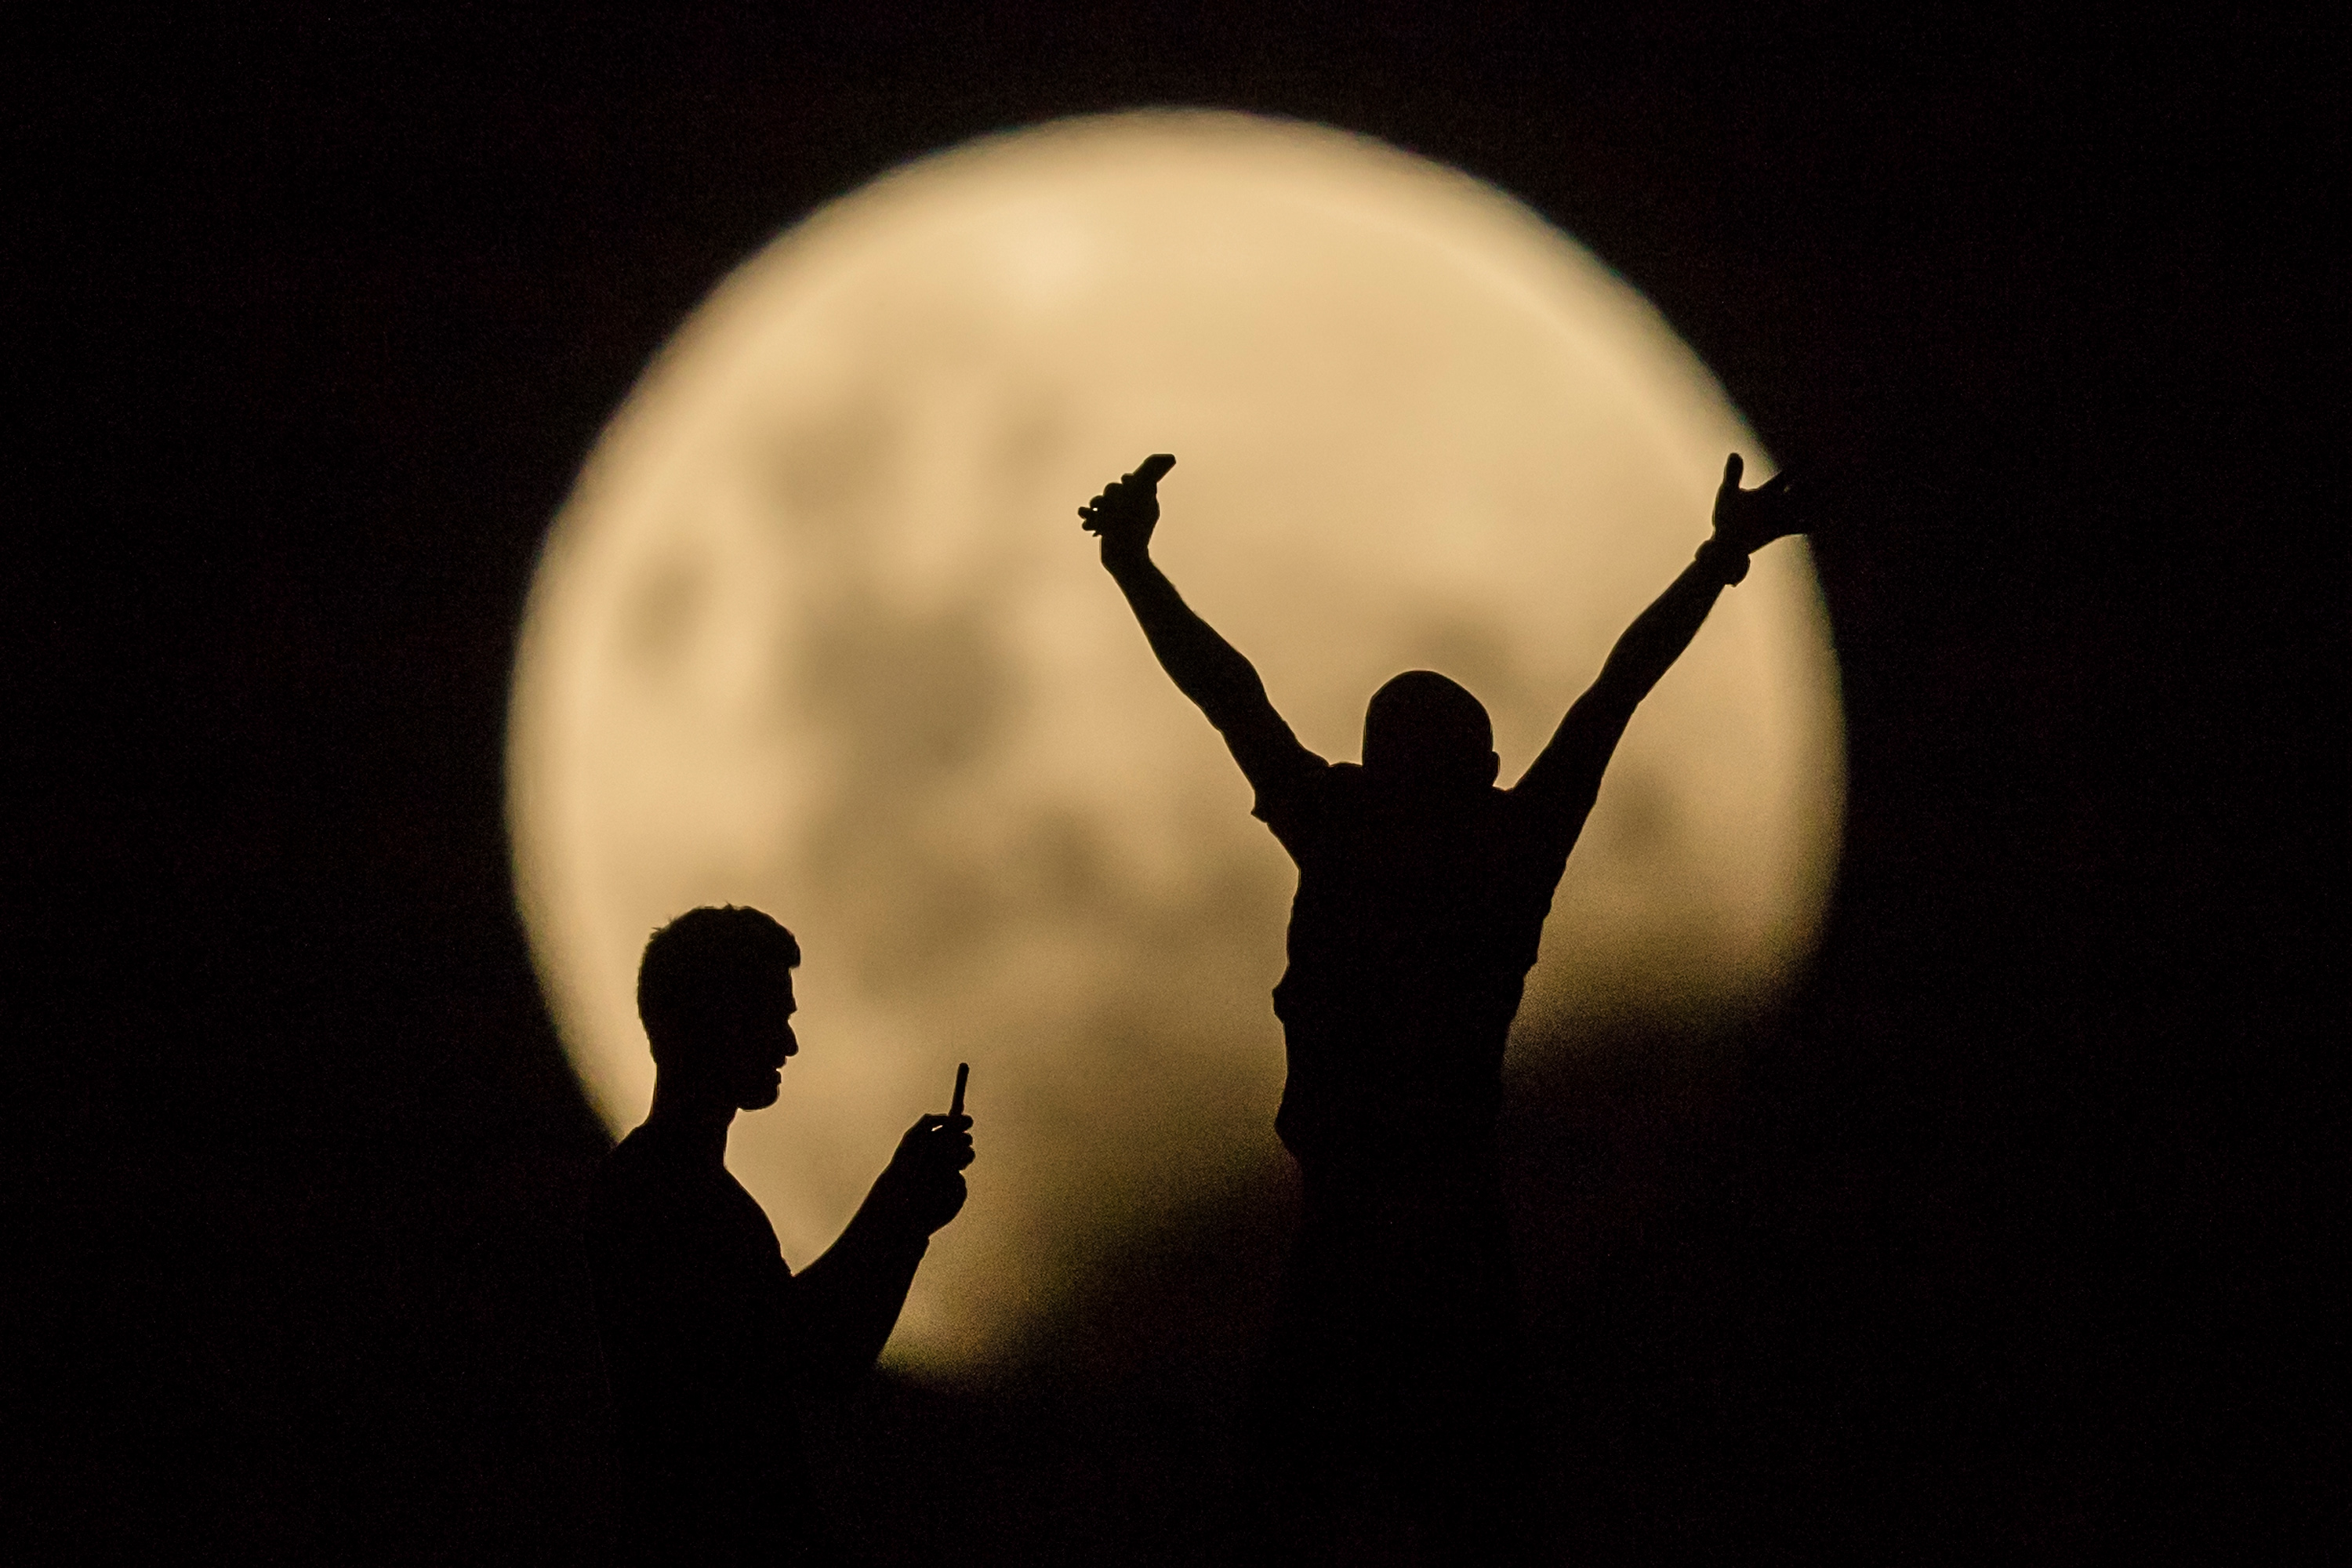 People take photos of the Super moon in Lancelin, Australia, on Jan. 31, 2018. (Paul Kane—Getty Images)